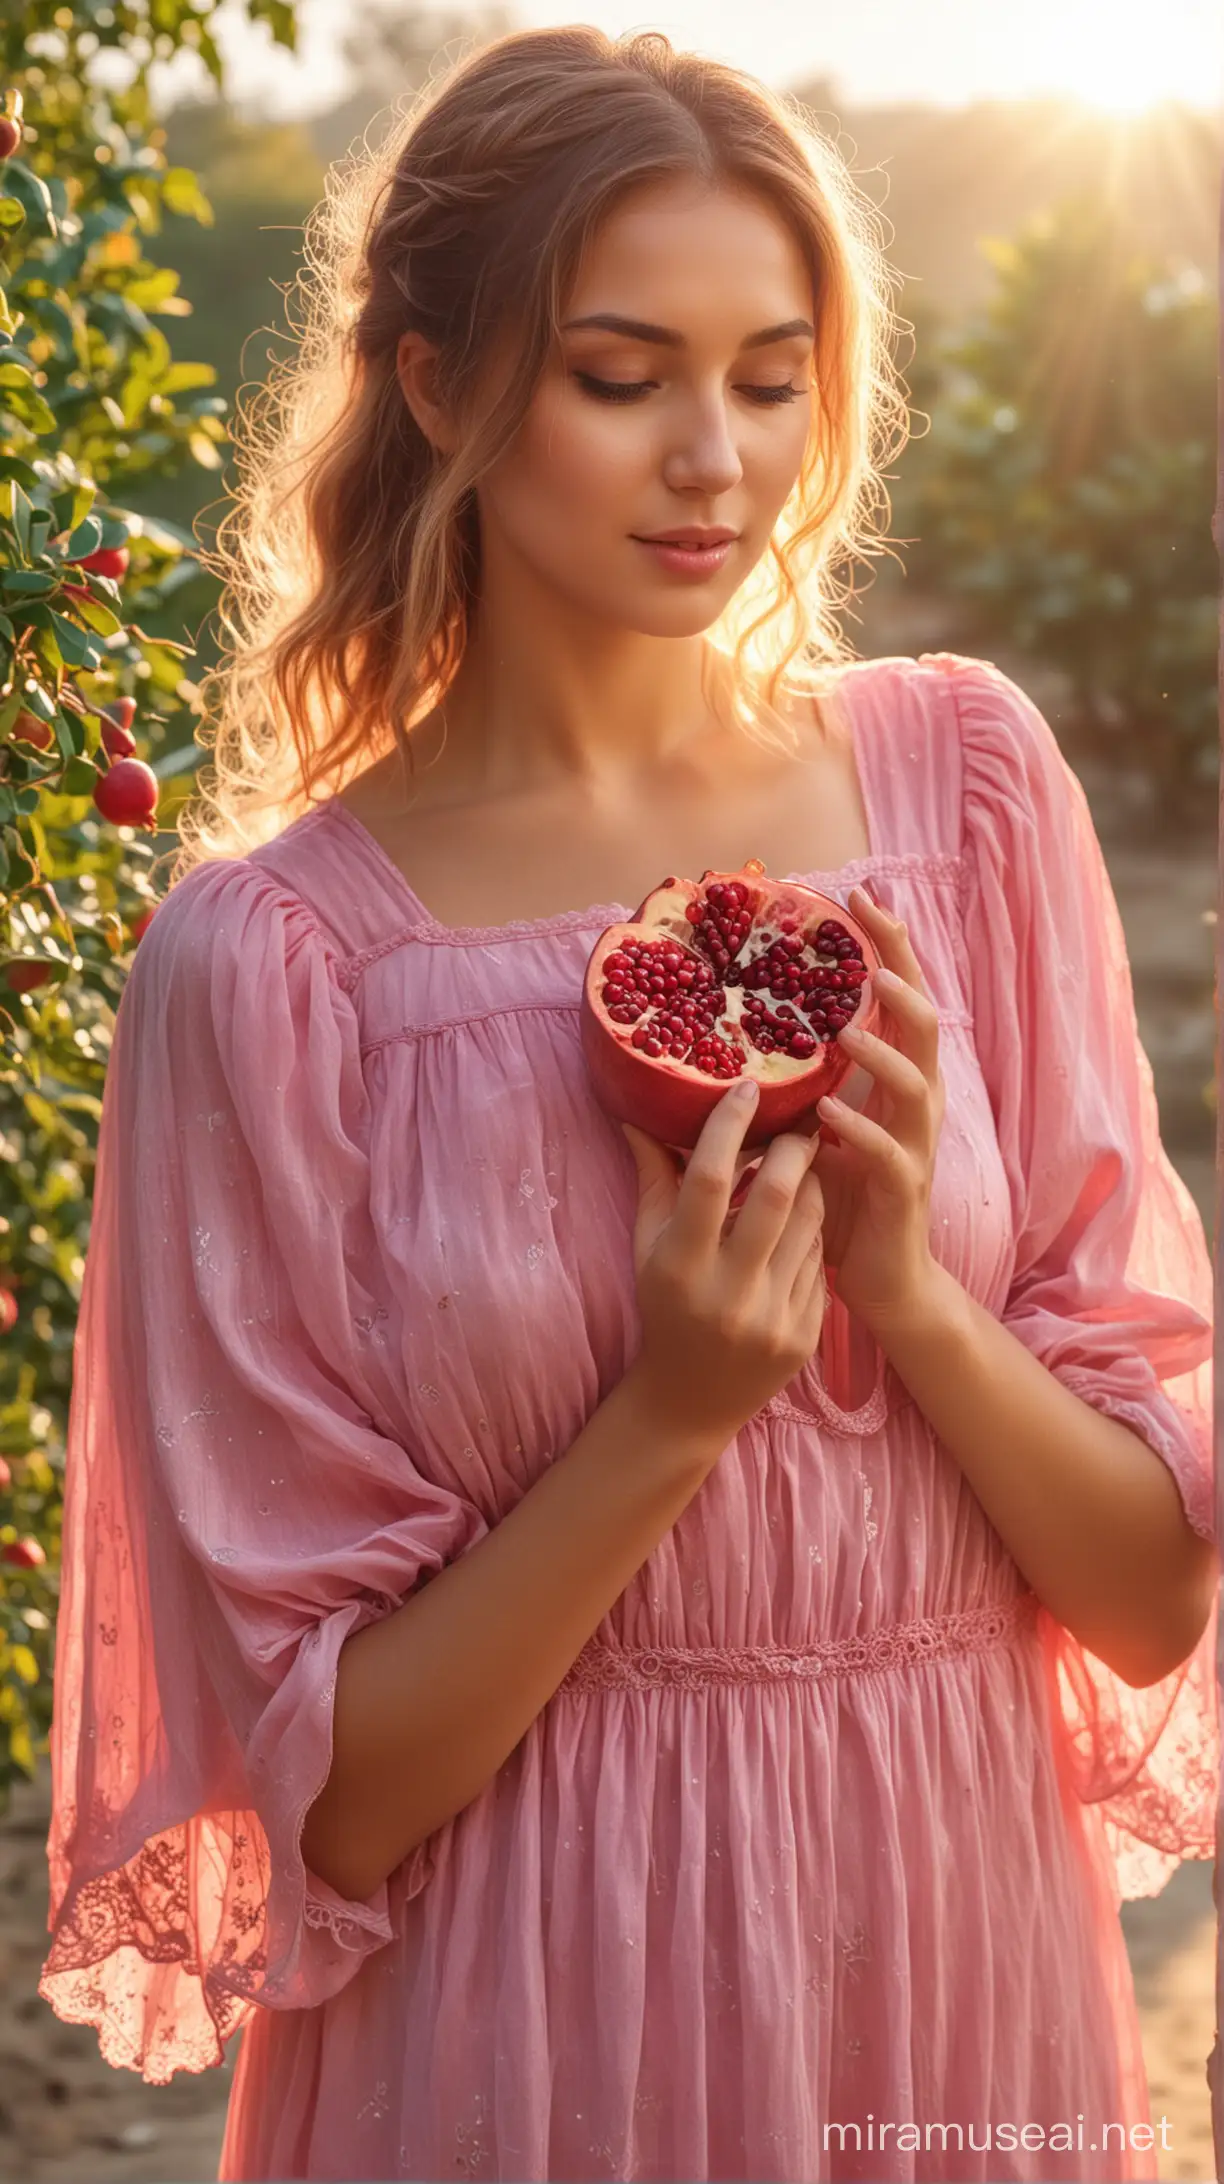 Ethereal Angelic Women in Pink Dress Holding Pomegranate Natural Sunlit Beauty